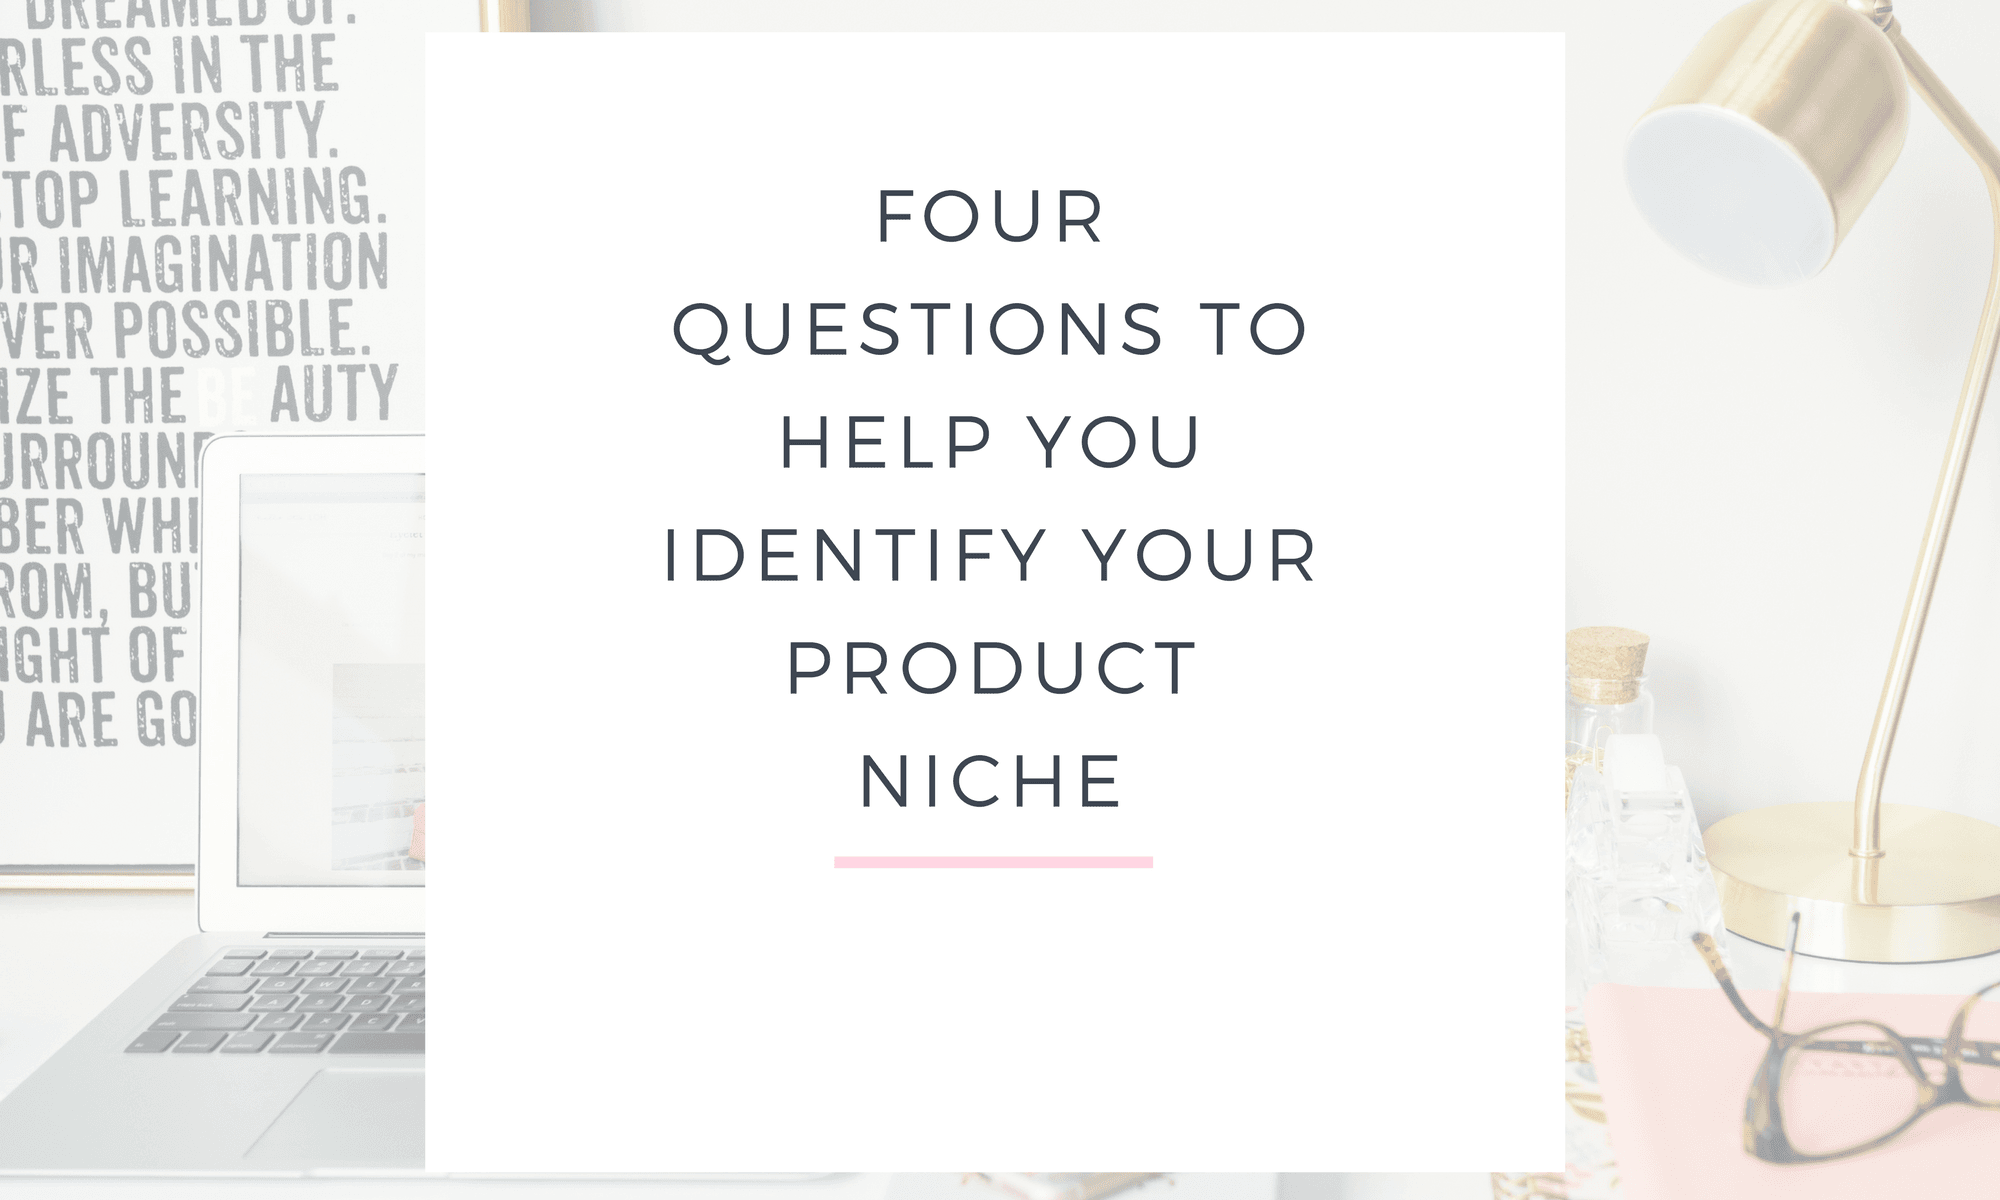 FOUR QUESTIONS TO HELP YOU IDENTIFY YOUR PRODUCT NICHE